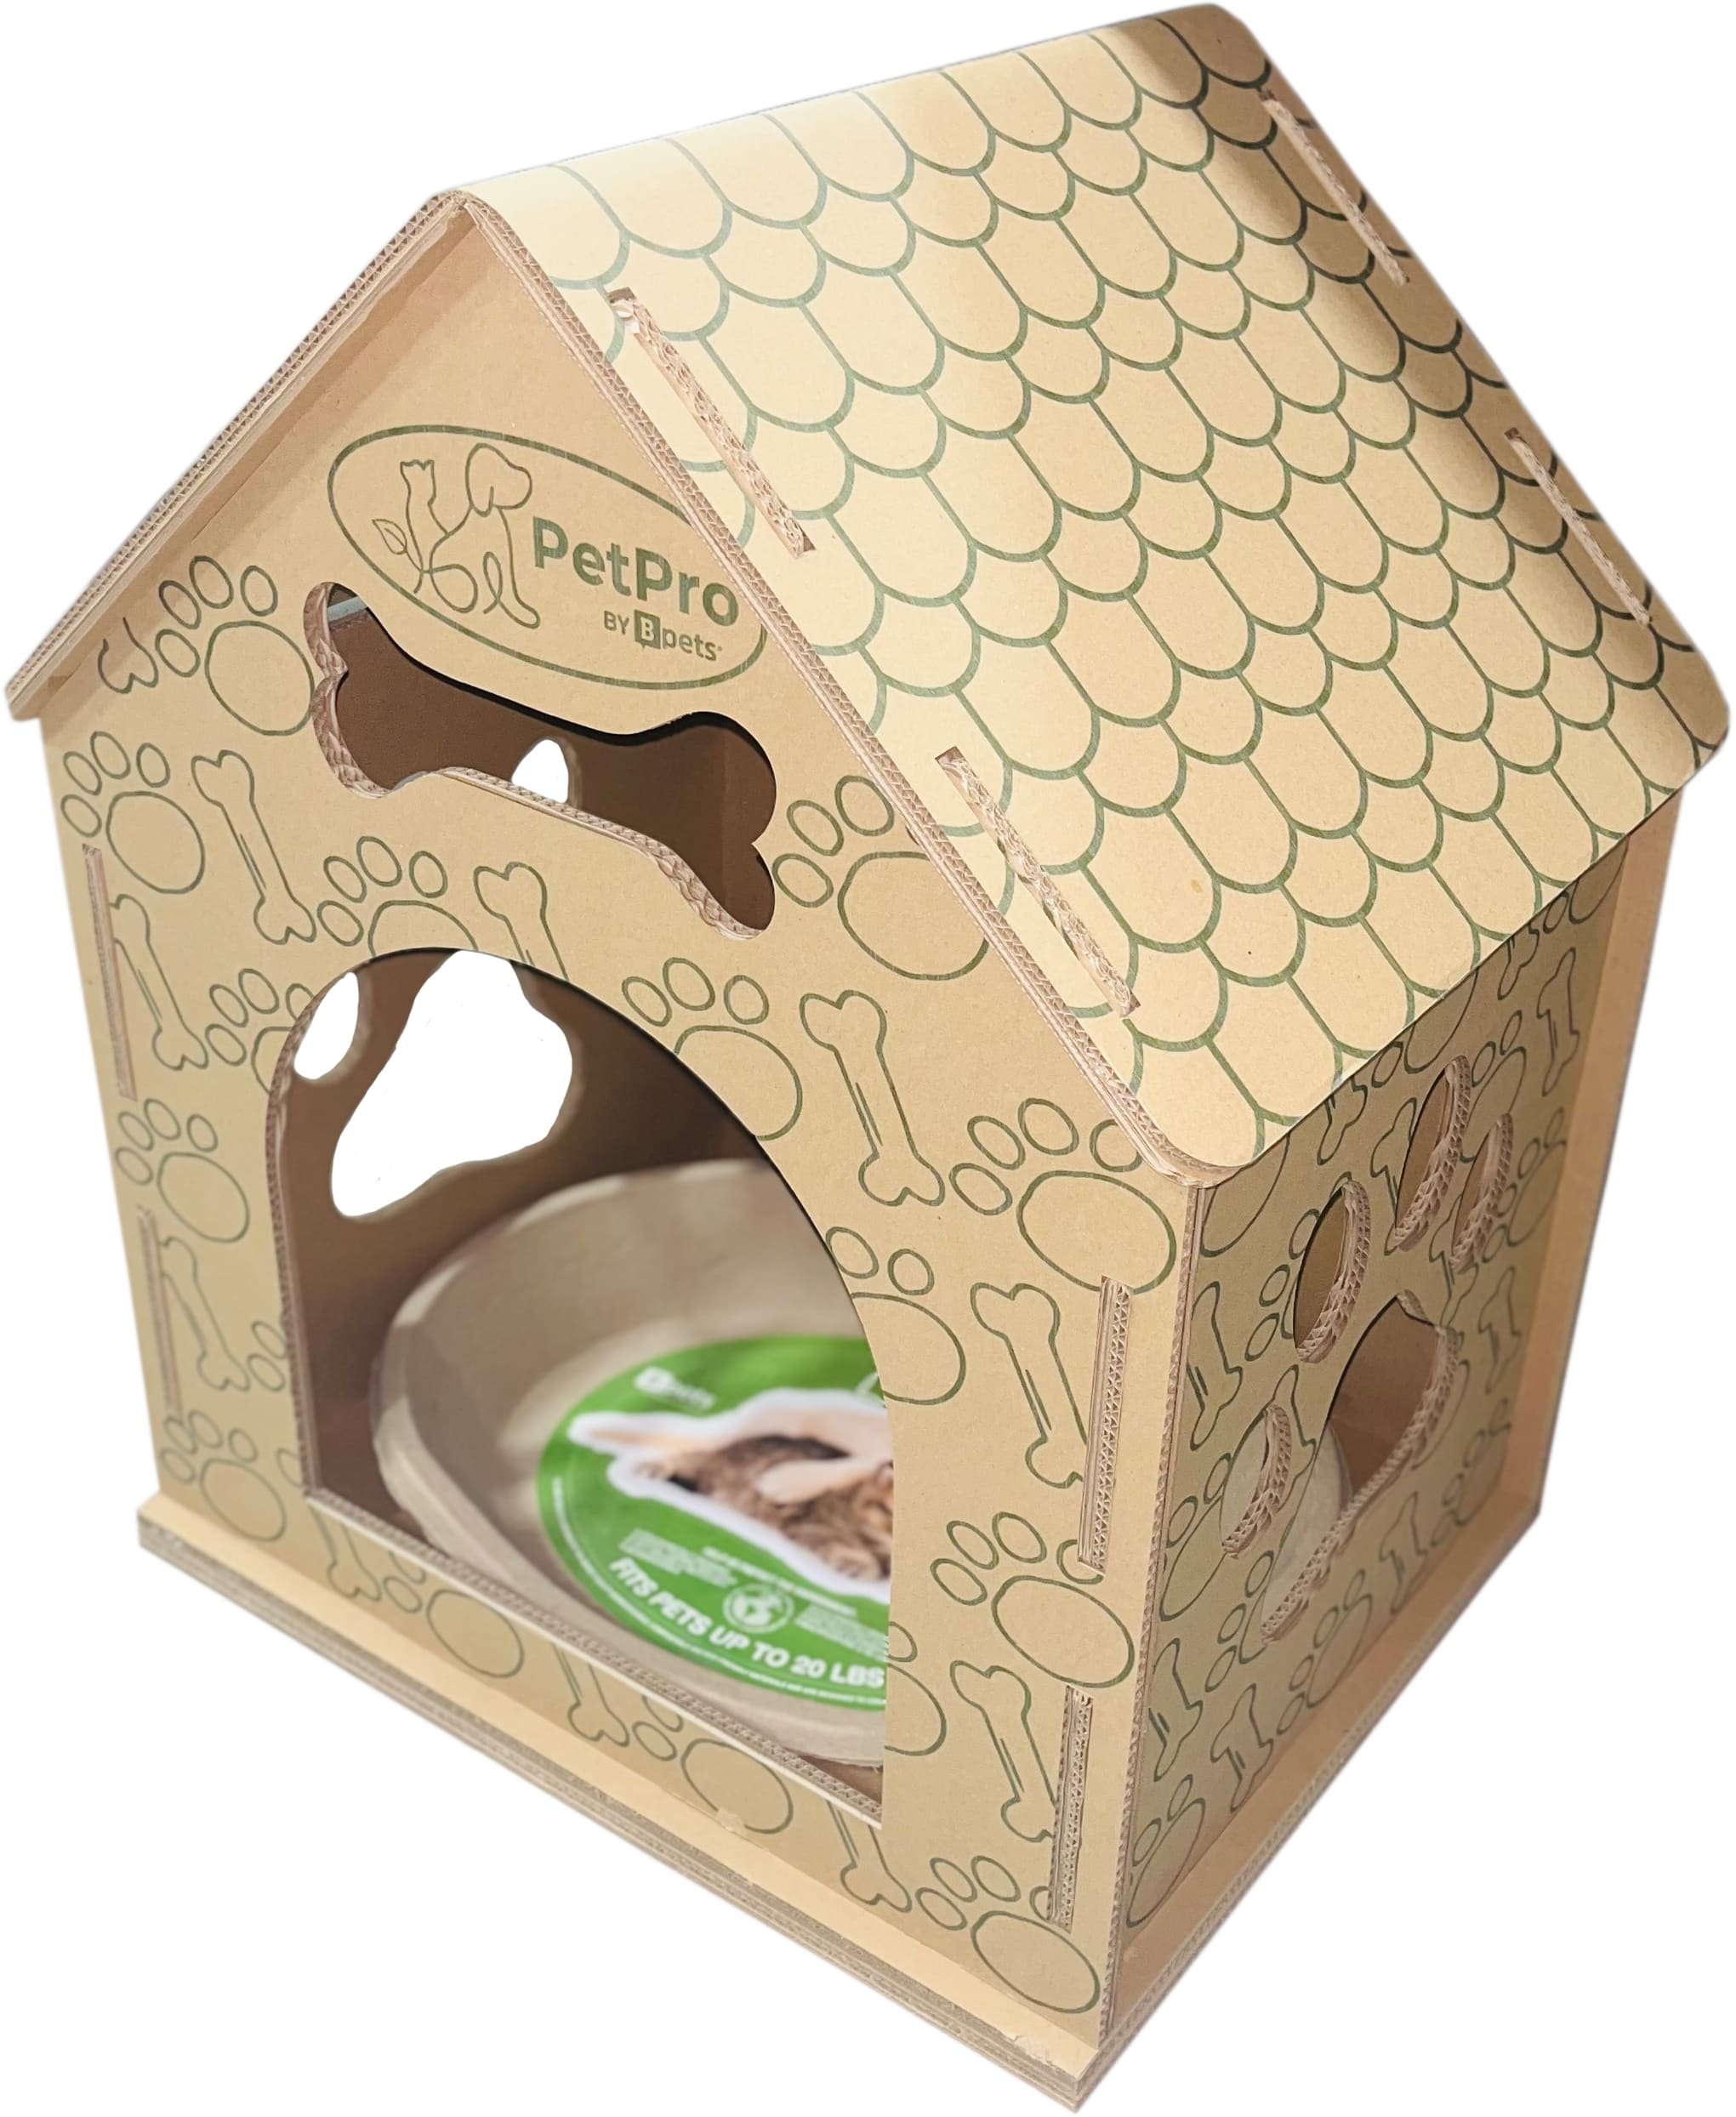 B Pet Eco-Friendly Cardboard Dog House w/Plush Bed! Indoor, Modern Crate Alt., Sustainable Shelter. Small/Med Dogs. Easy Assembly